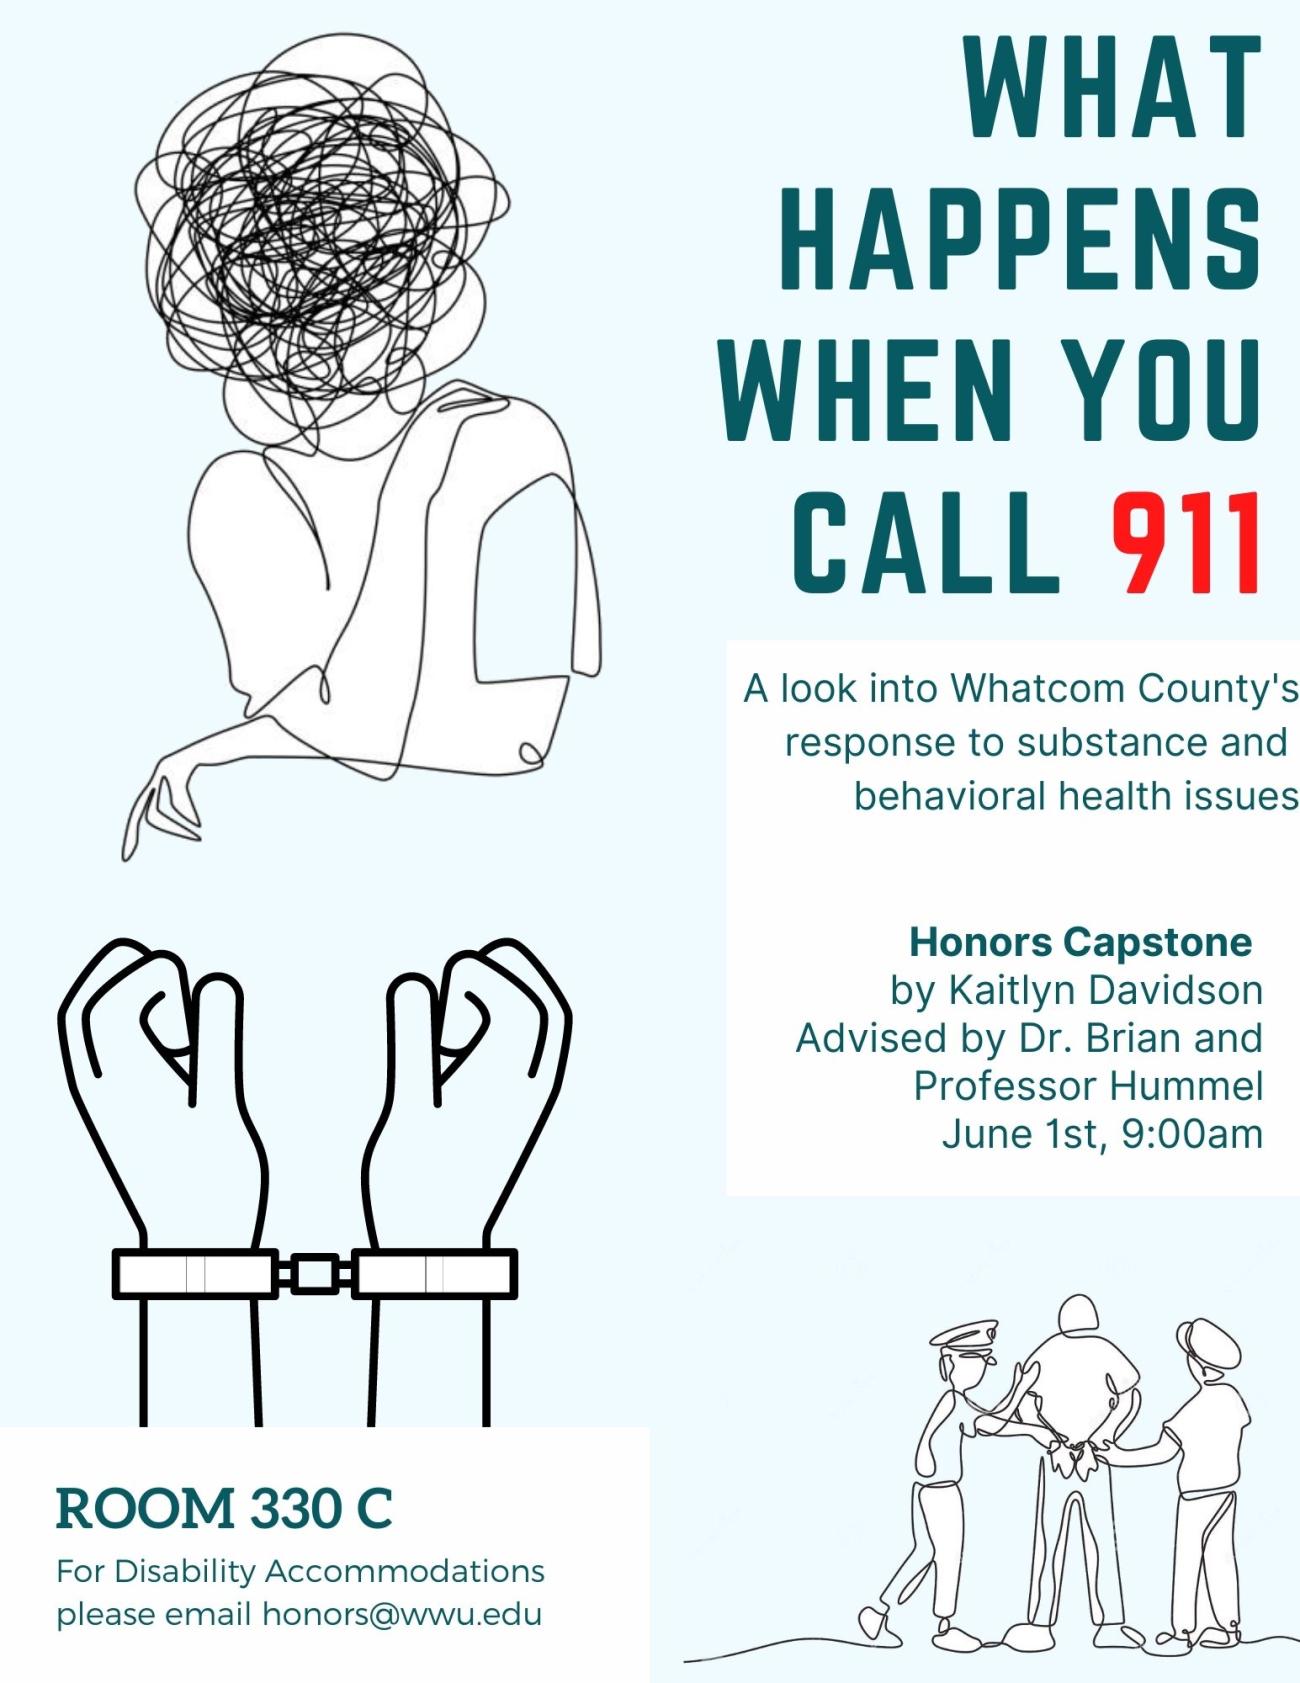 Blue background with images of a person with clipart of a scribbled confused head, hands in handcuffs, and a person being arrested. Text reads: "What happens when you call 911? A look into Whatcom County's response to substance and behavioral health issues. Honors capstone by Kaitlyn Davidson Advised by Dr. Brian and Professor Hummel, June 1st, 9:00 am. Room 330C. For disability accommodations, please email honors@wwu.edu."